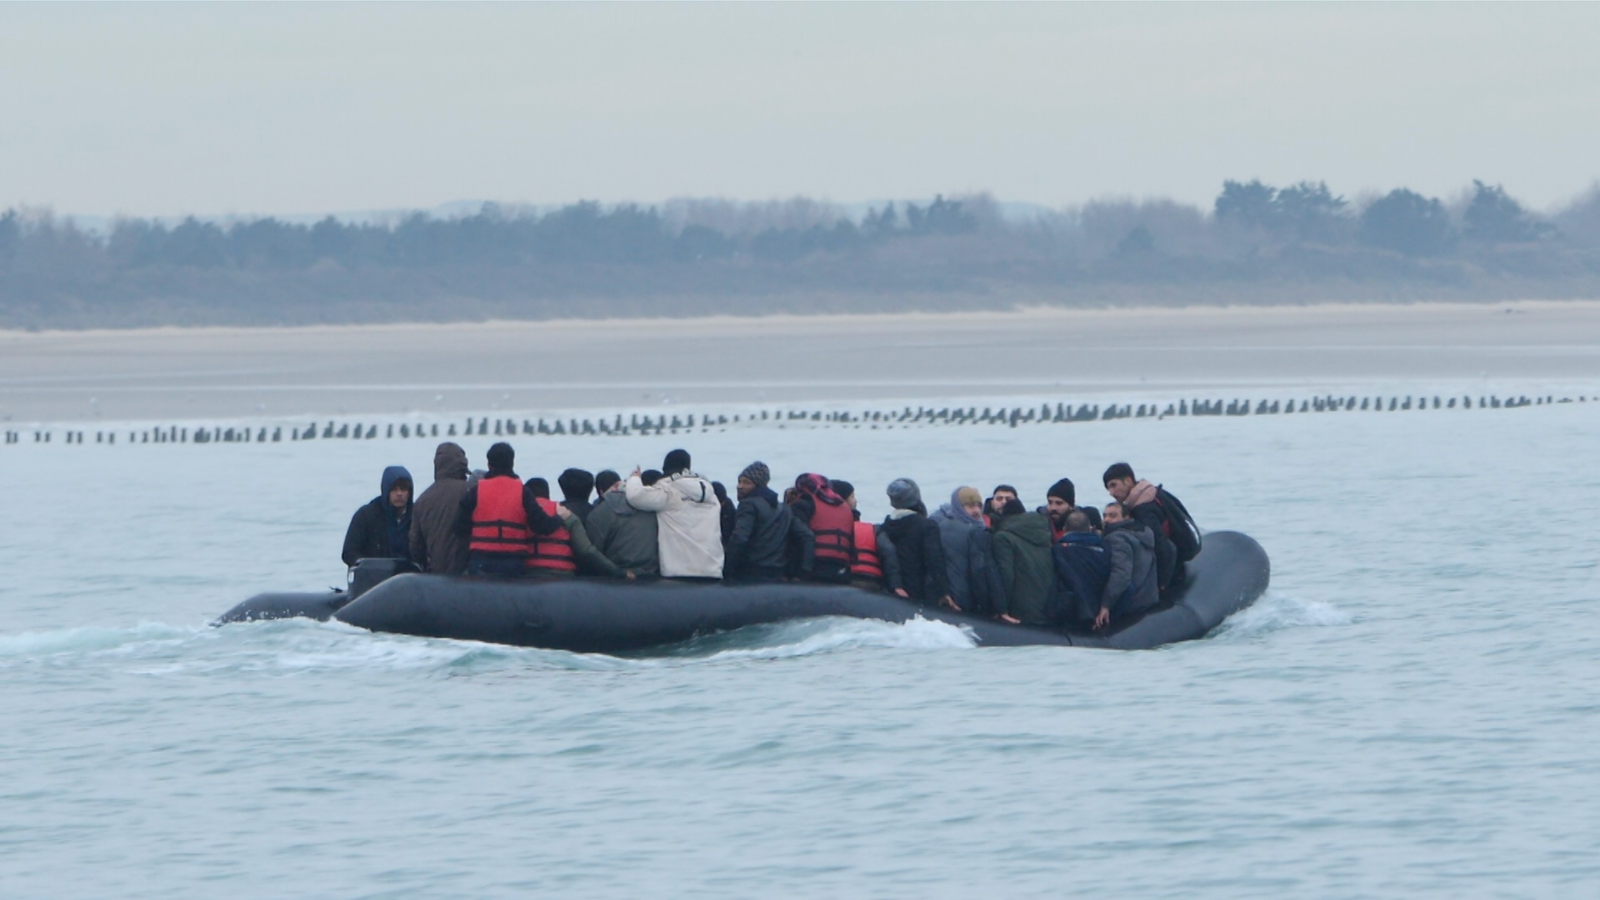 Human trafficking victims on small boats crossing Channel not breaking law, minister suggests